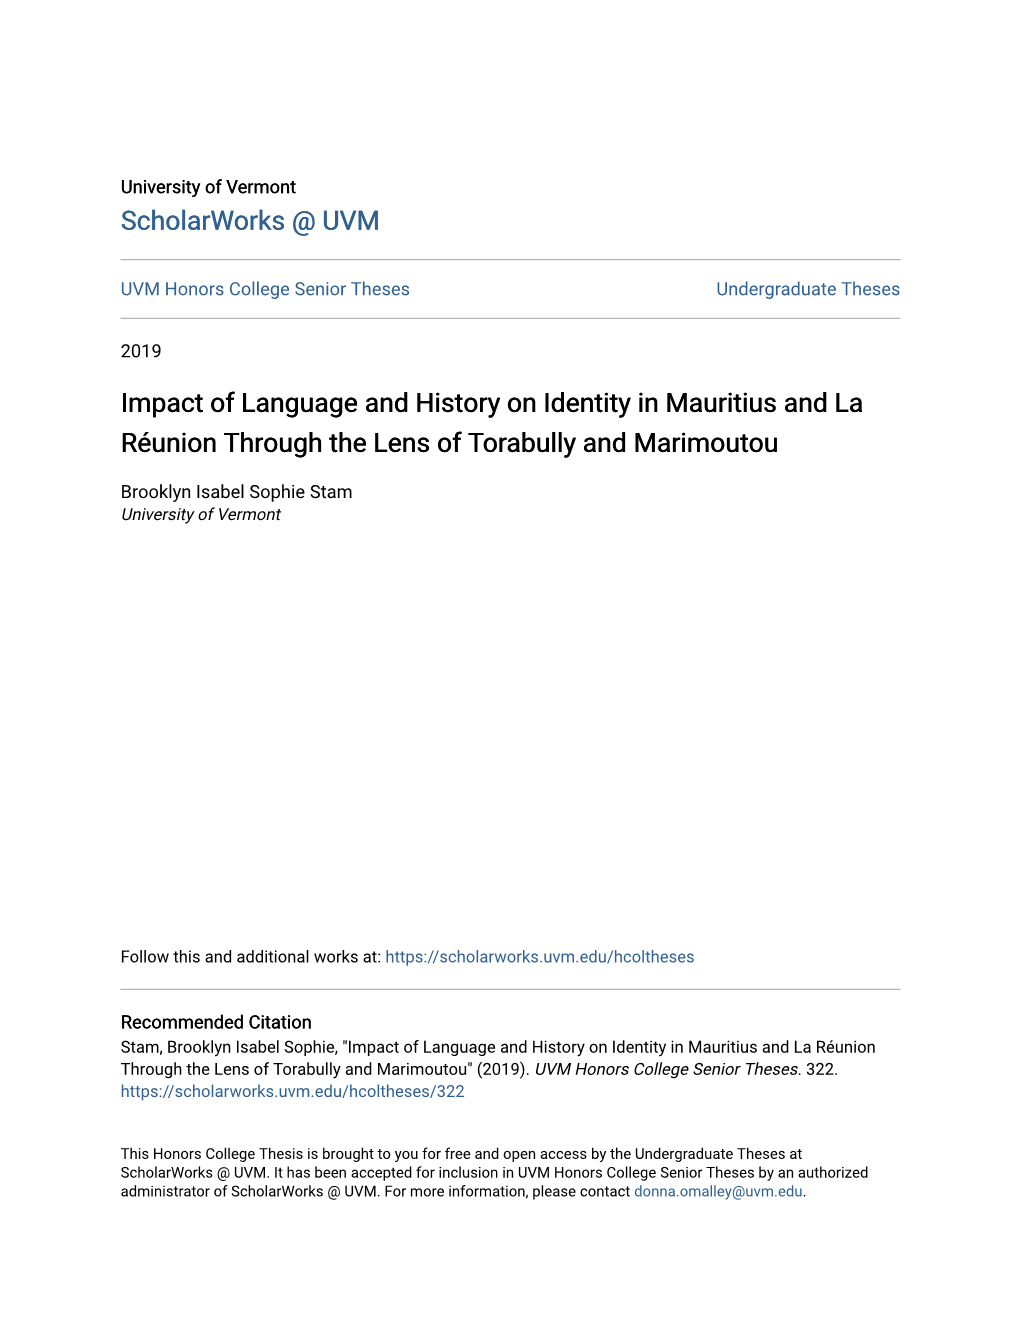 Impact of Language and History on Identity in Mauritius and La Réunion Through the Lens of Torabully and Marimoutou